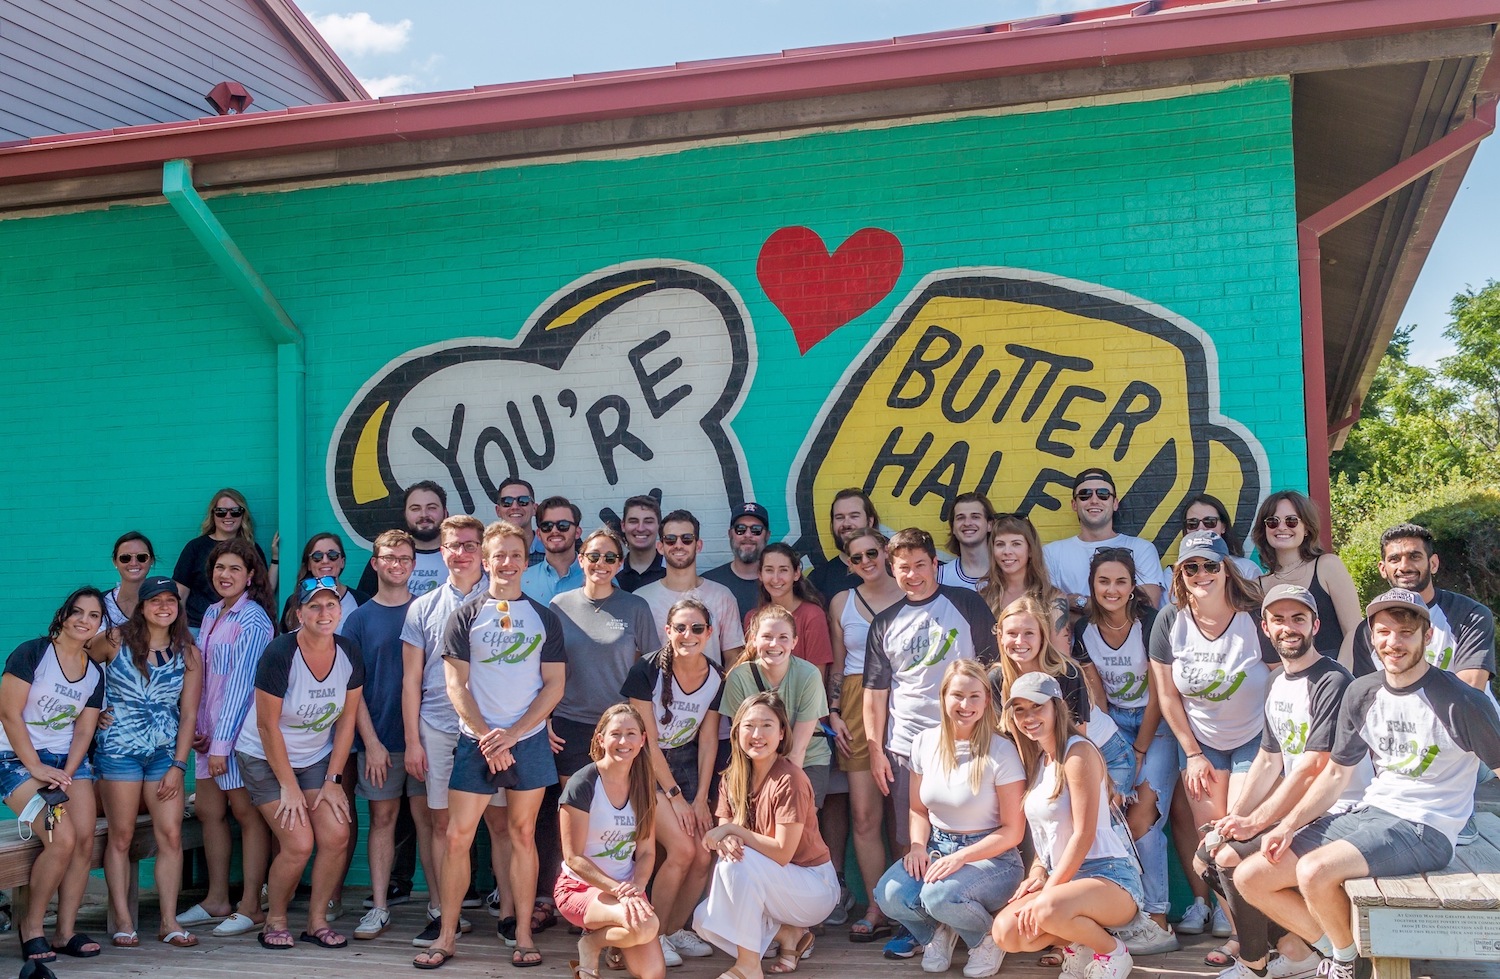 Effective Spend employees pose in front of the “You're My Butter Half” mural in Austin.